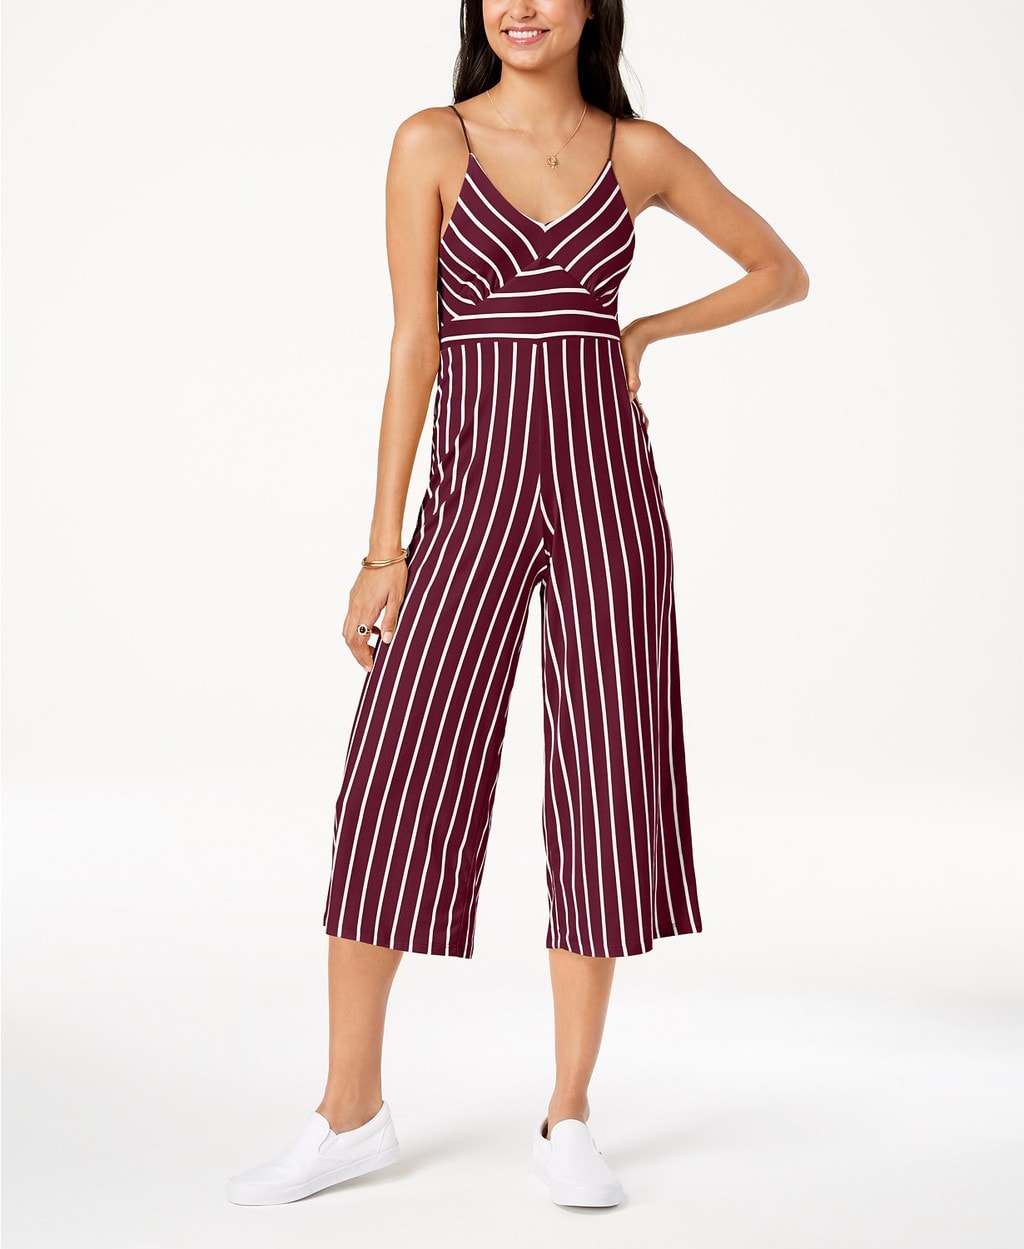 Macy's Polly and Esther Red Striped Jumpsuit